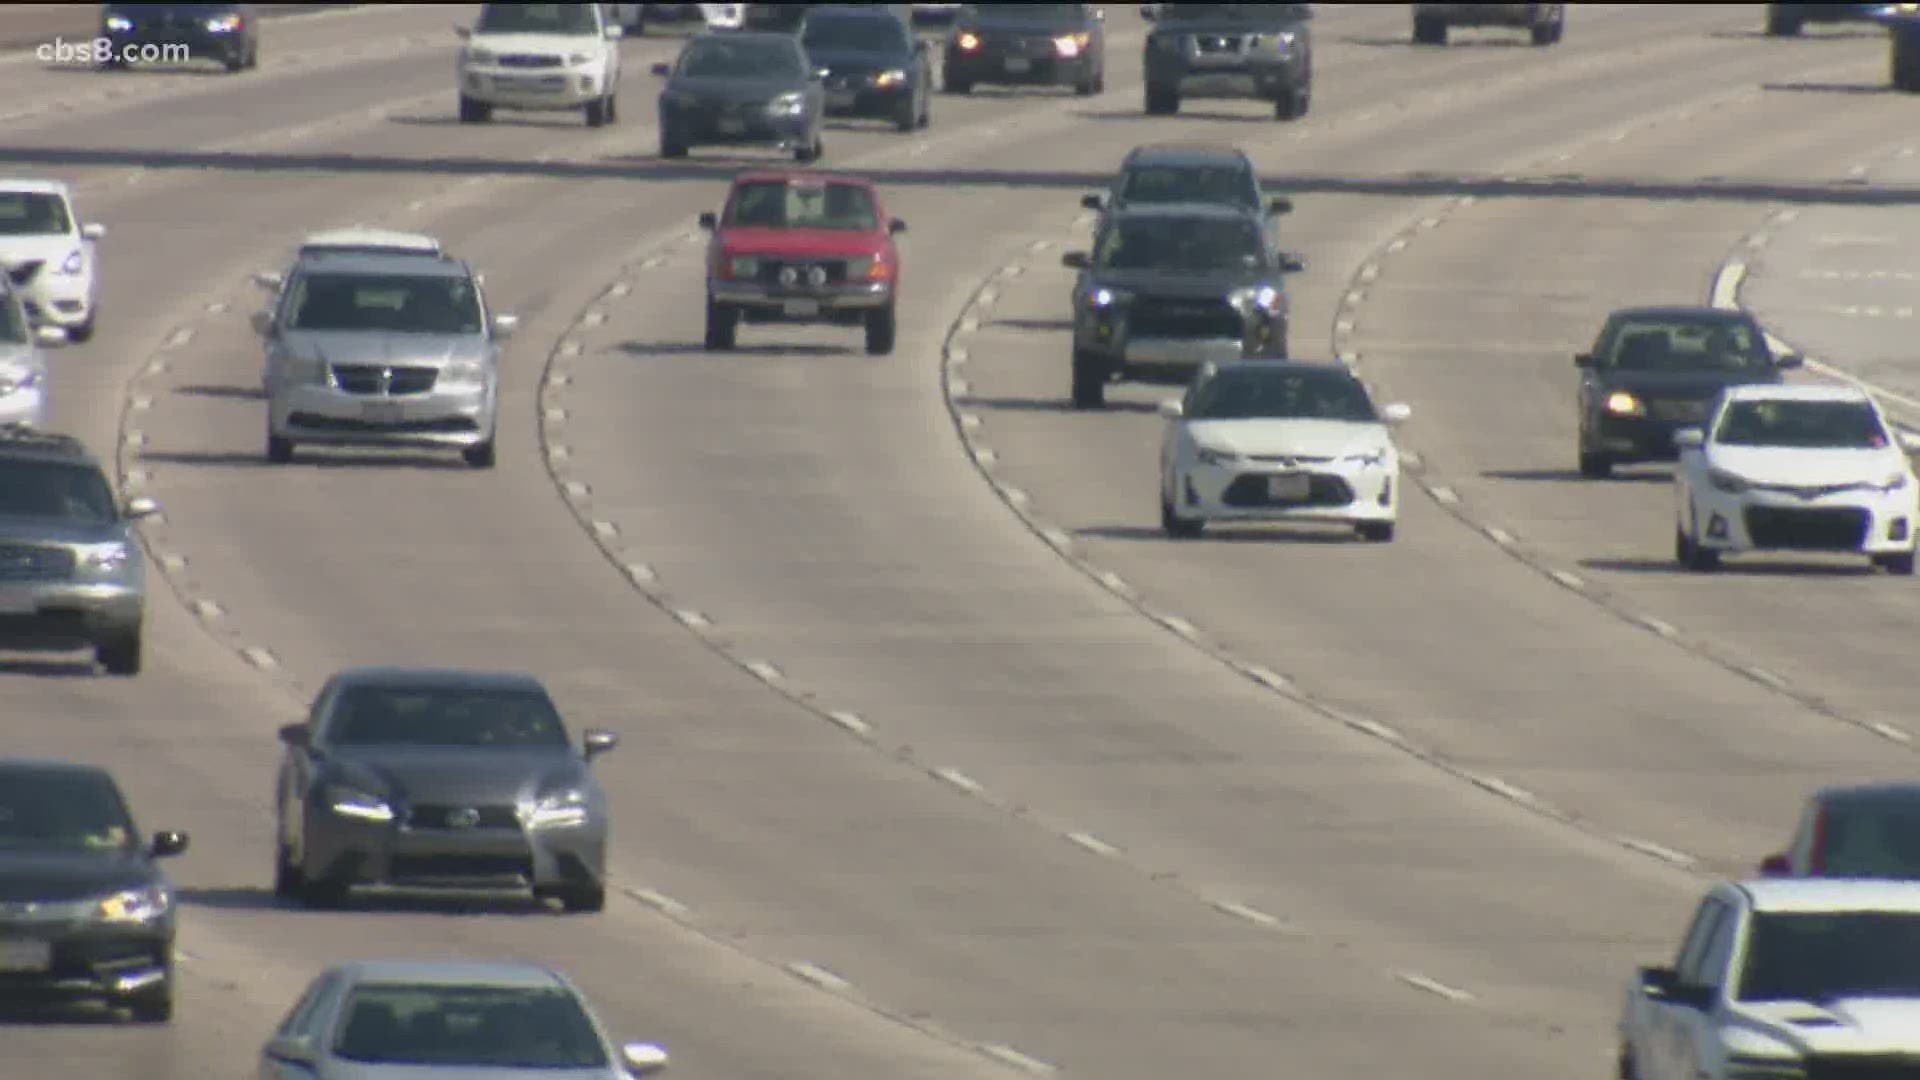 In the first month of stay-at-home orders, CHP said officers handed out 4,000 tickets to people driving faster than 100 mph.